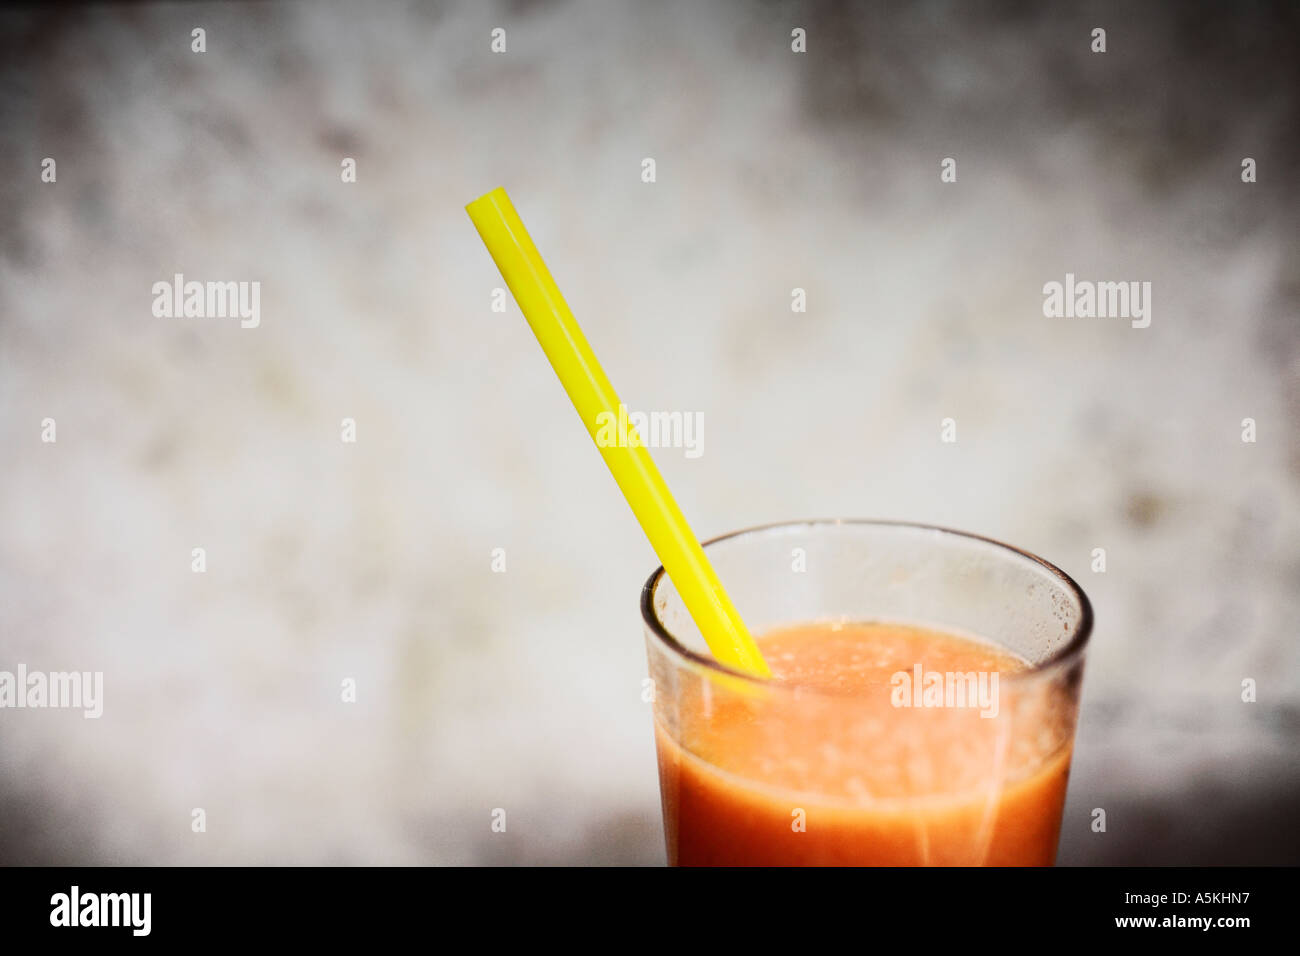 Download Glass Of Orange Fruit Juice With Yellow Straw Stock Photo Alamy PSD Mockup Templates